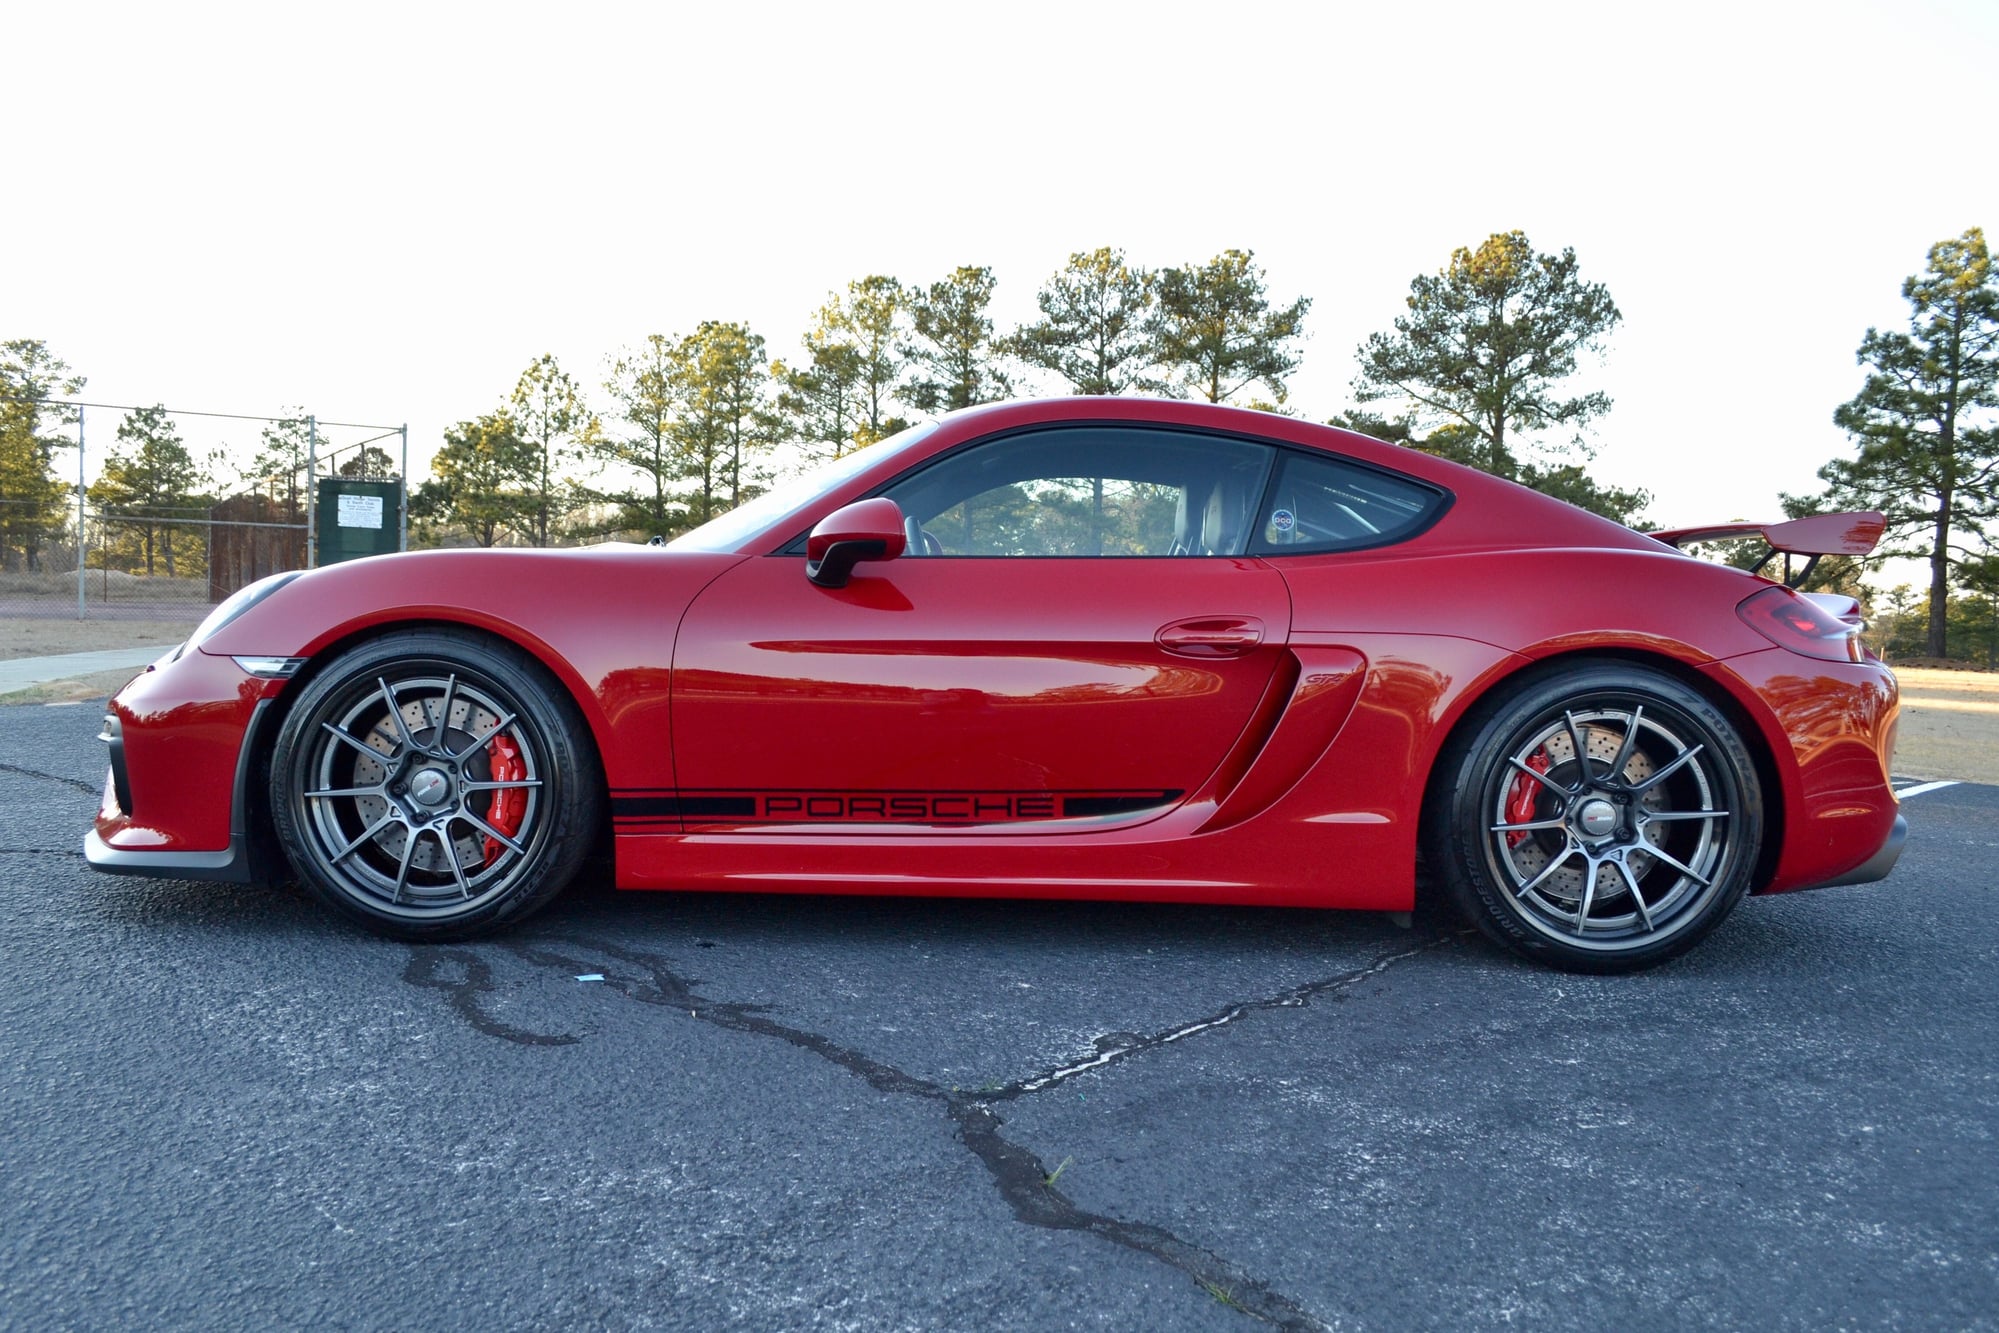 Wheels and Tires/Axles - FS GT4 Parts: IPD Plenum & GT3 throttle body, Forgeline CF205, Cantrell Roll Bar - New - 2016 Porsche Cayman GT4 - Sanford, NC 27332, United States